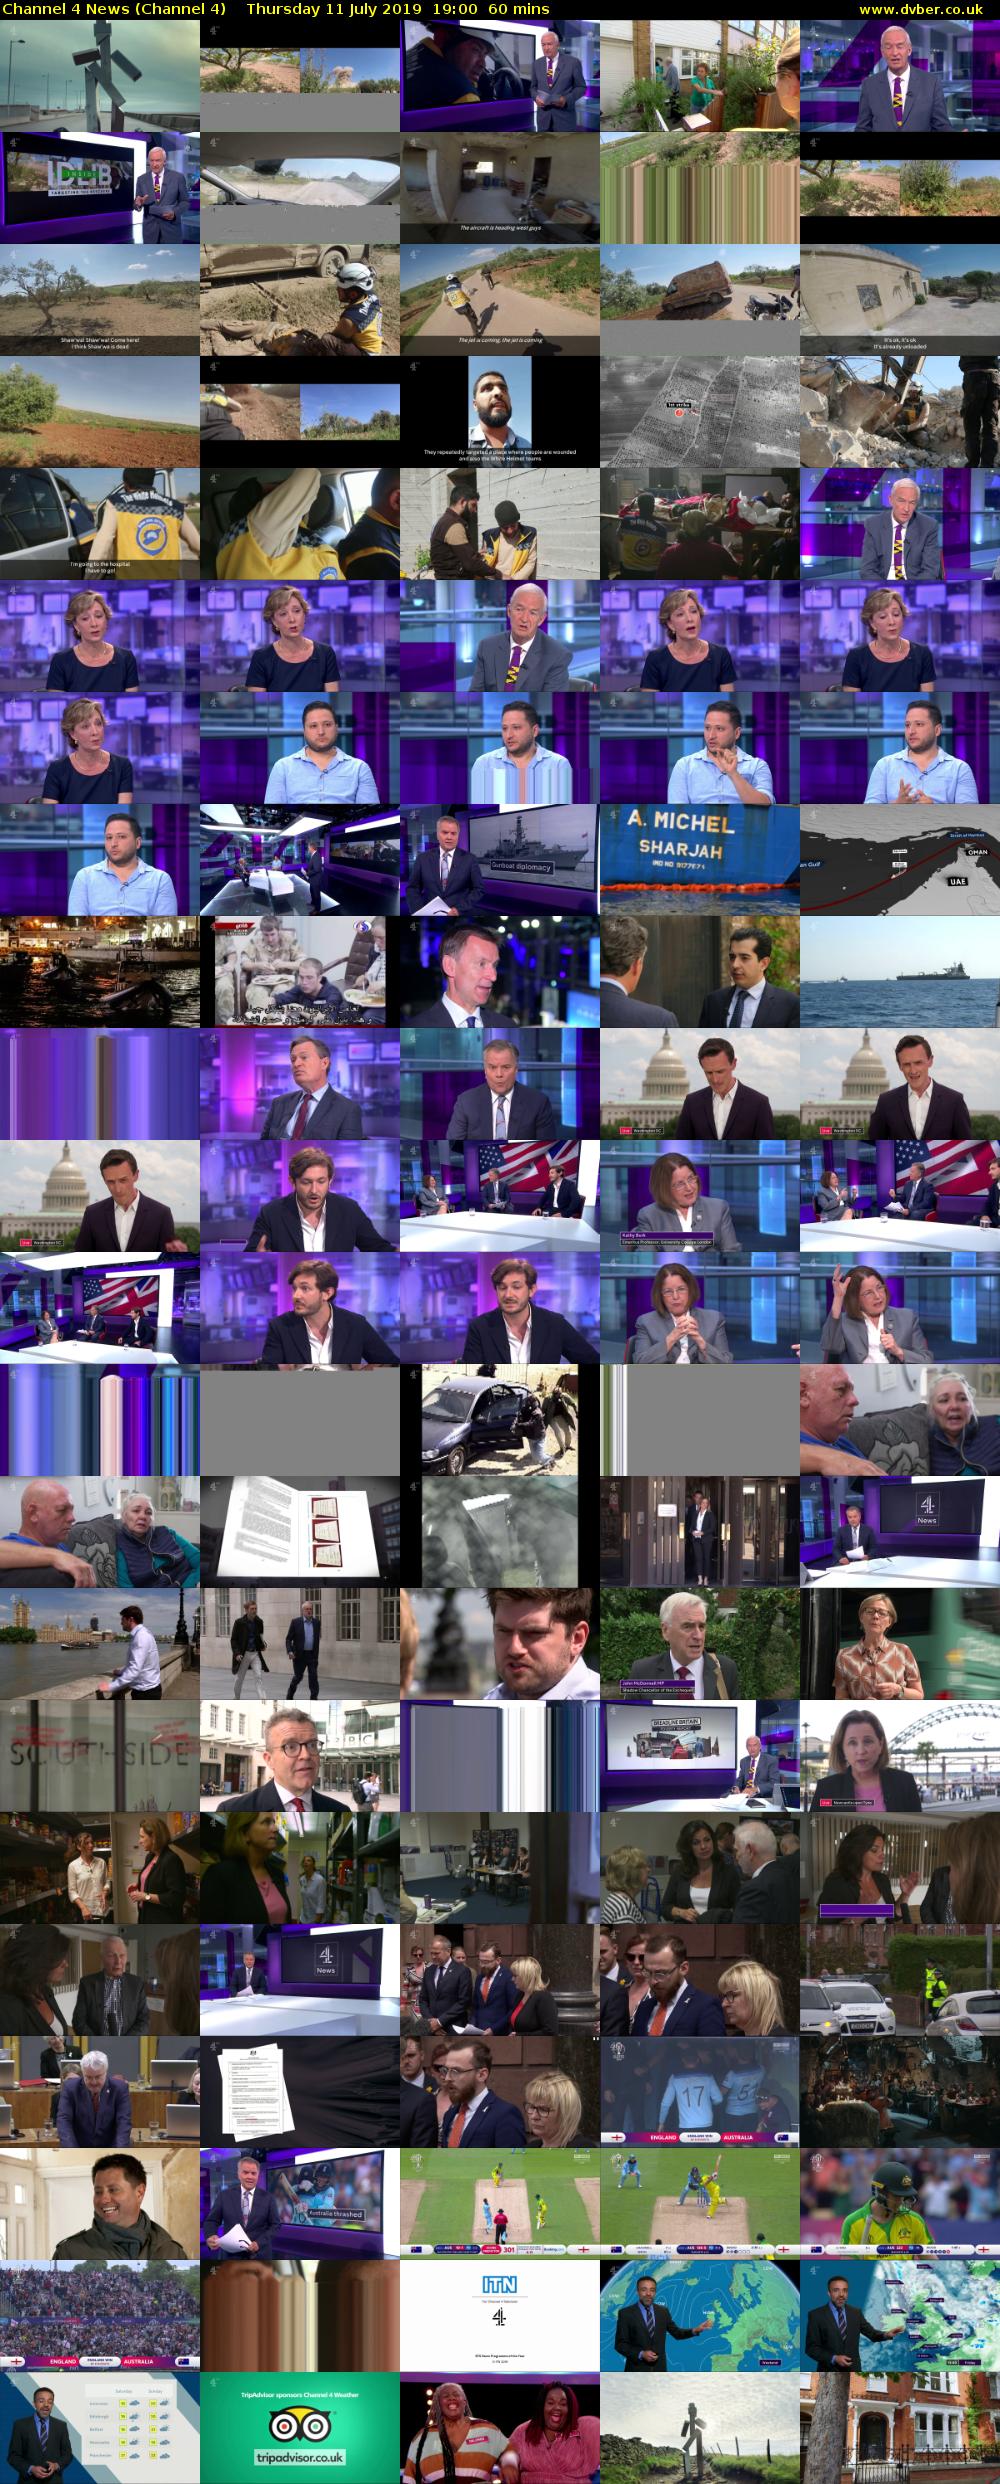 Channel 4 News (Channel 4) Thursday 11 July 2019 19:00 - 20:00